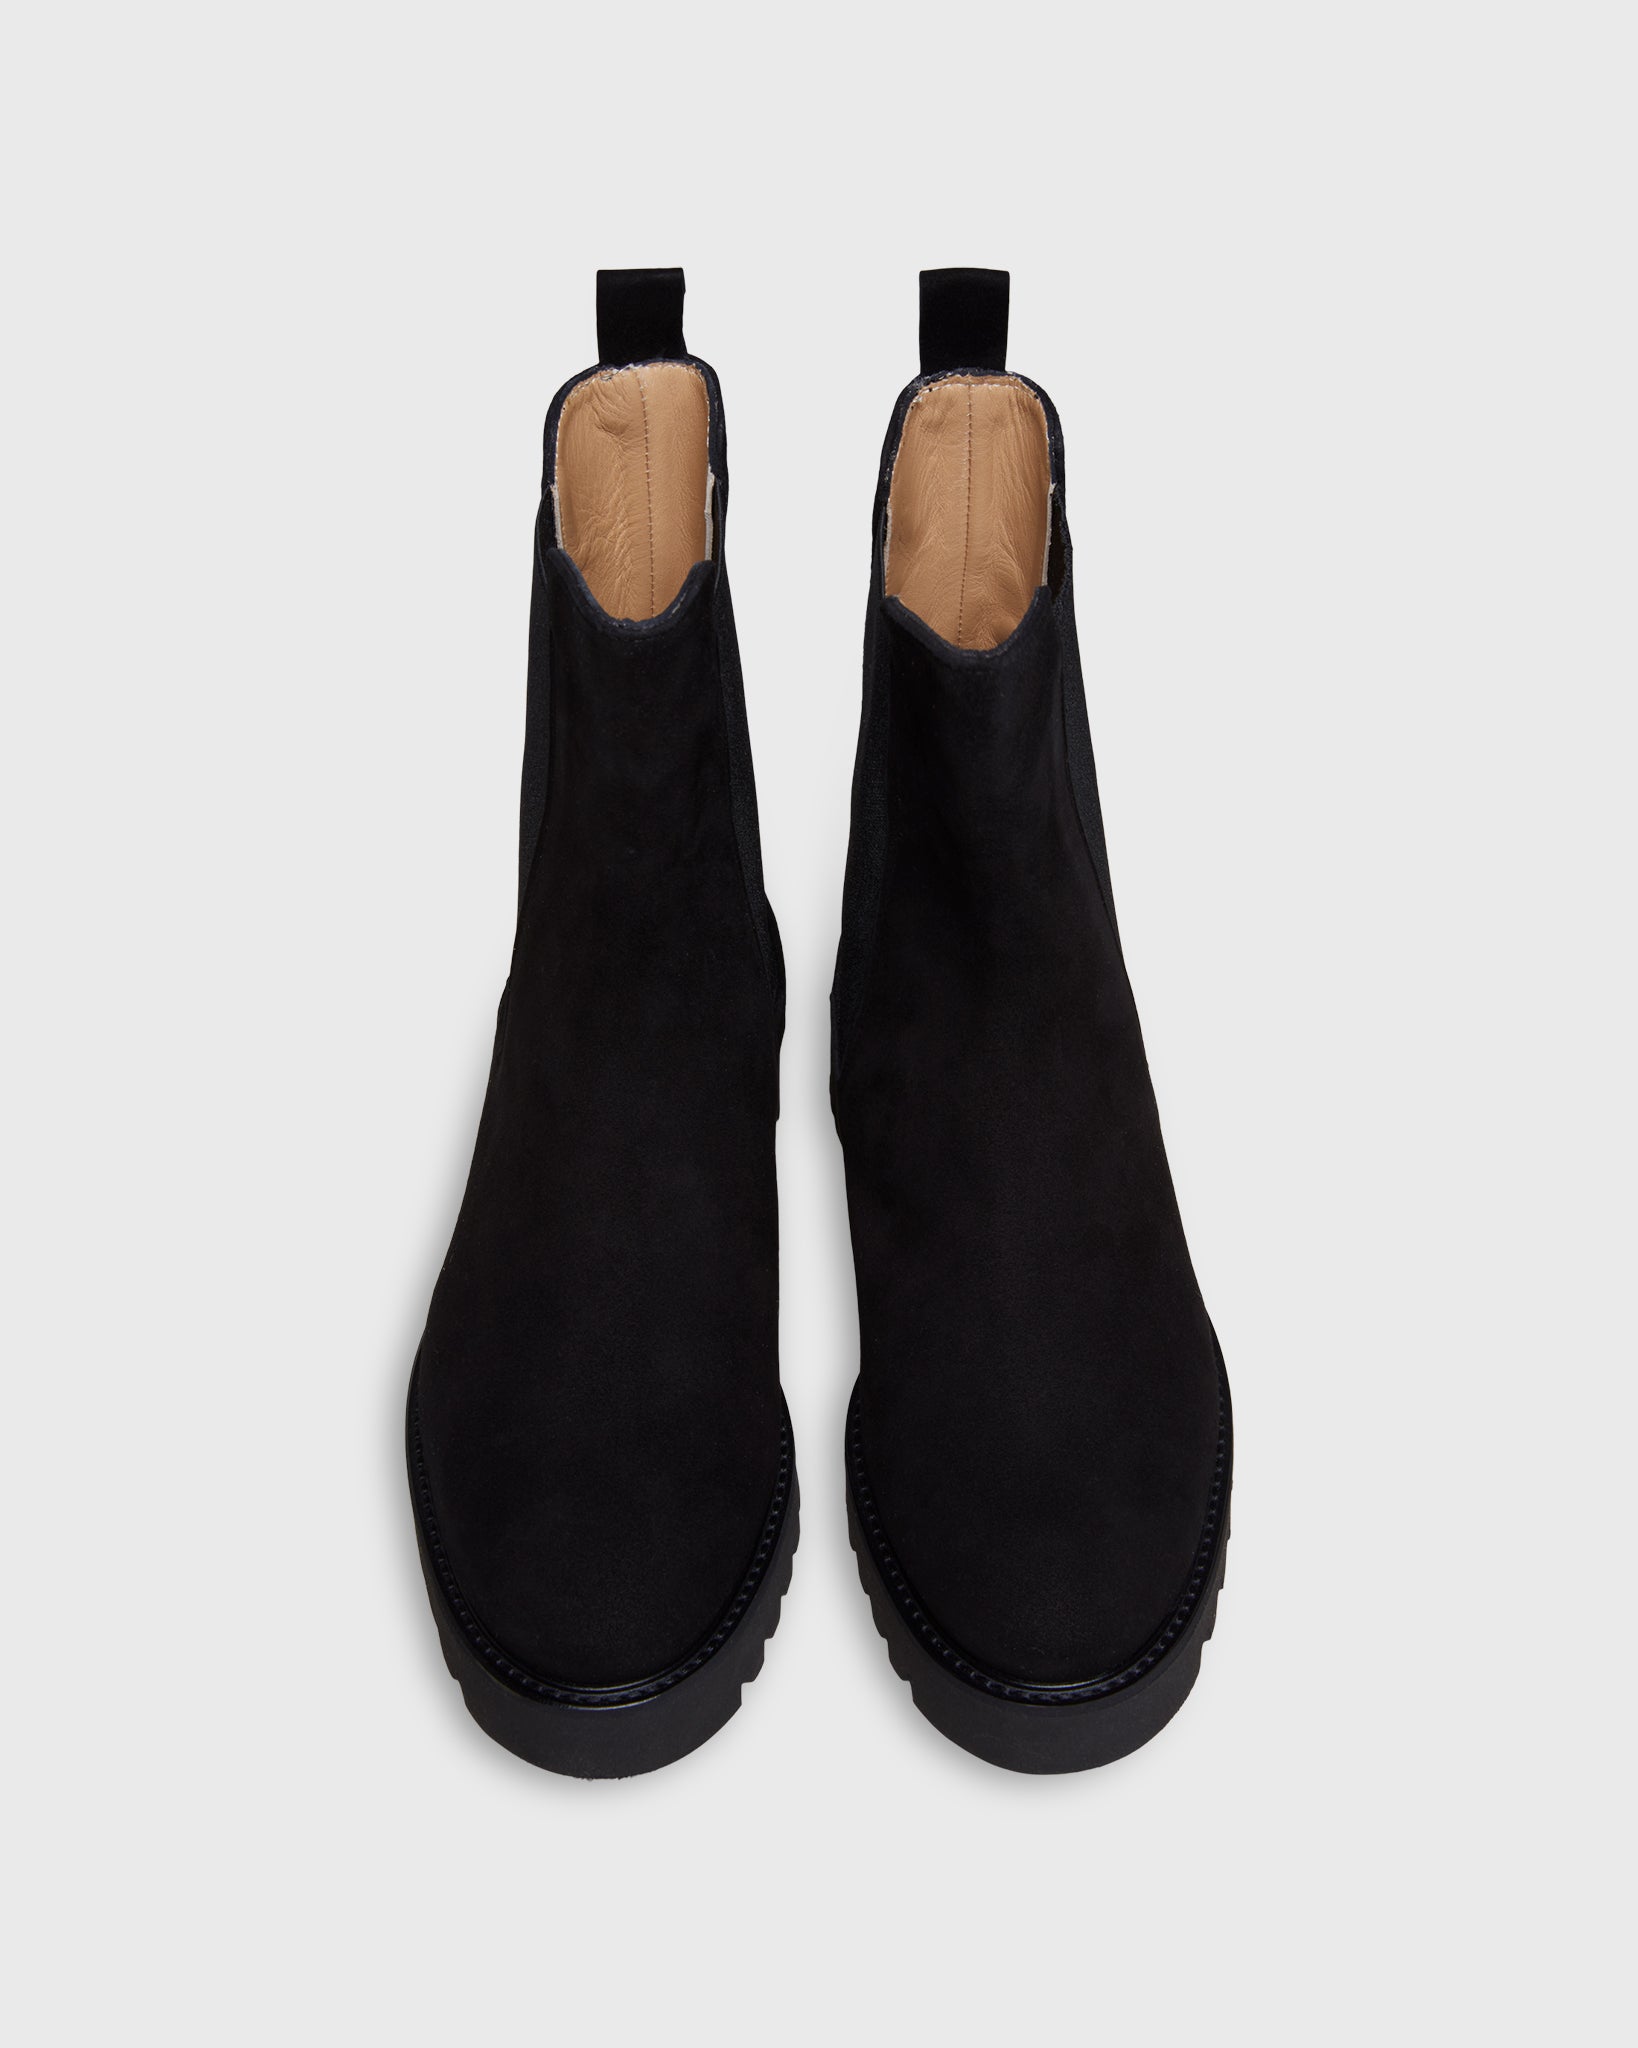 Tall Lug Sole Chelsea Boot in Black Suede